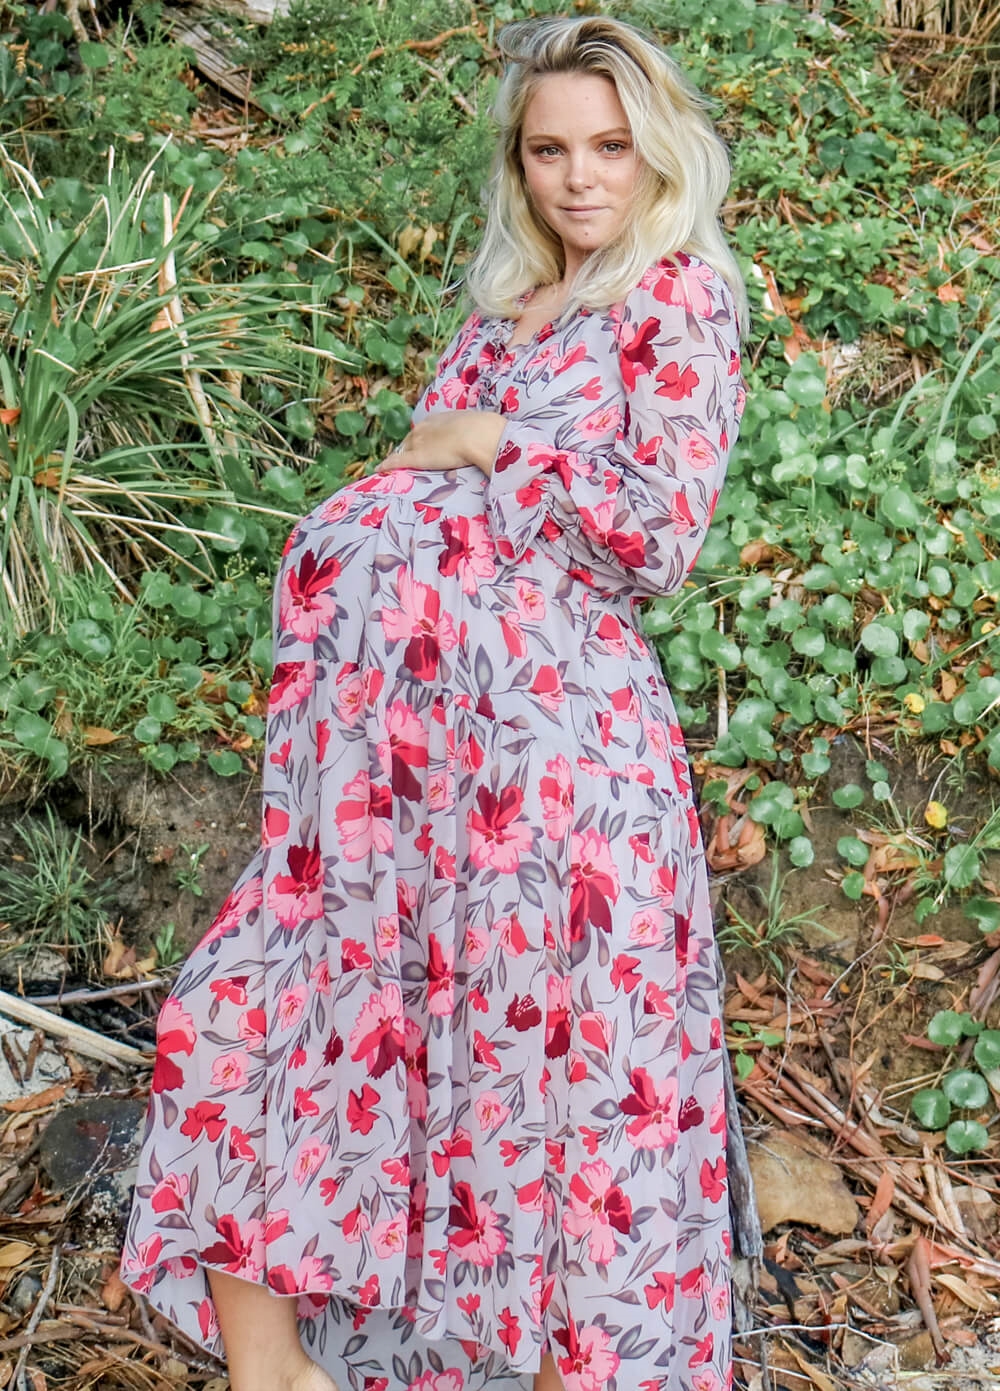 Lait & Co - Wanderlust Maternity Maxi Gown in Grey/Red Floral